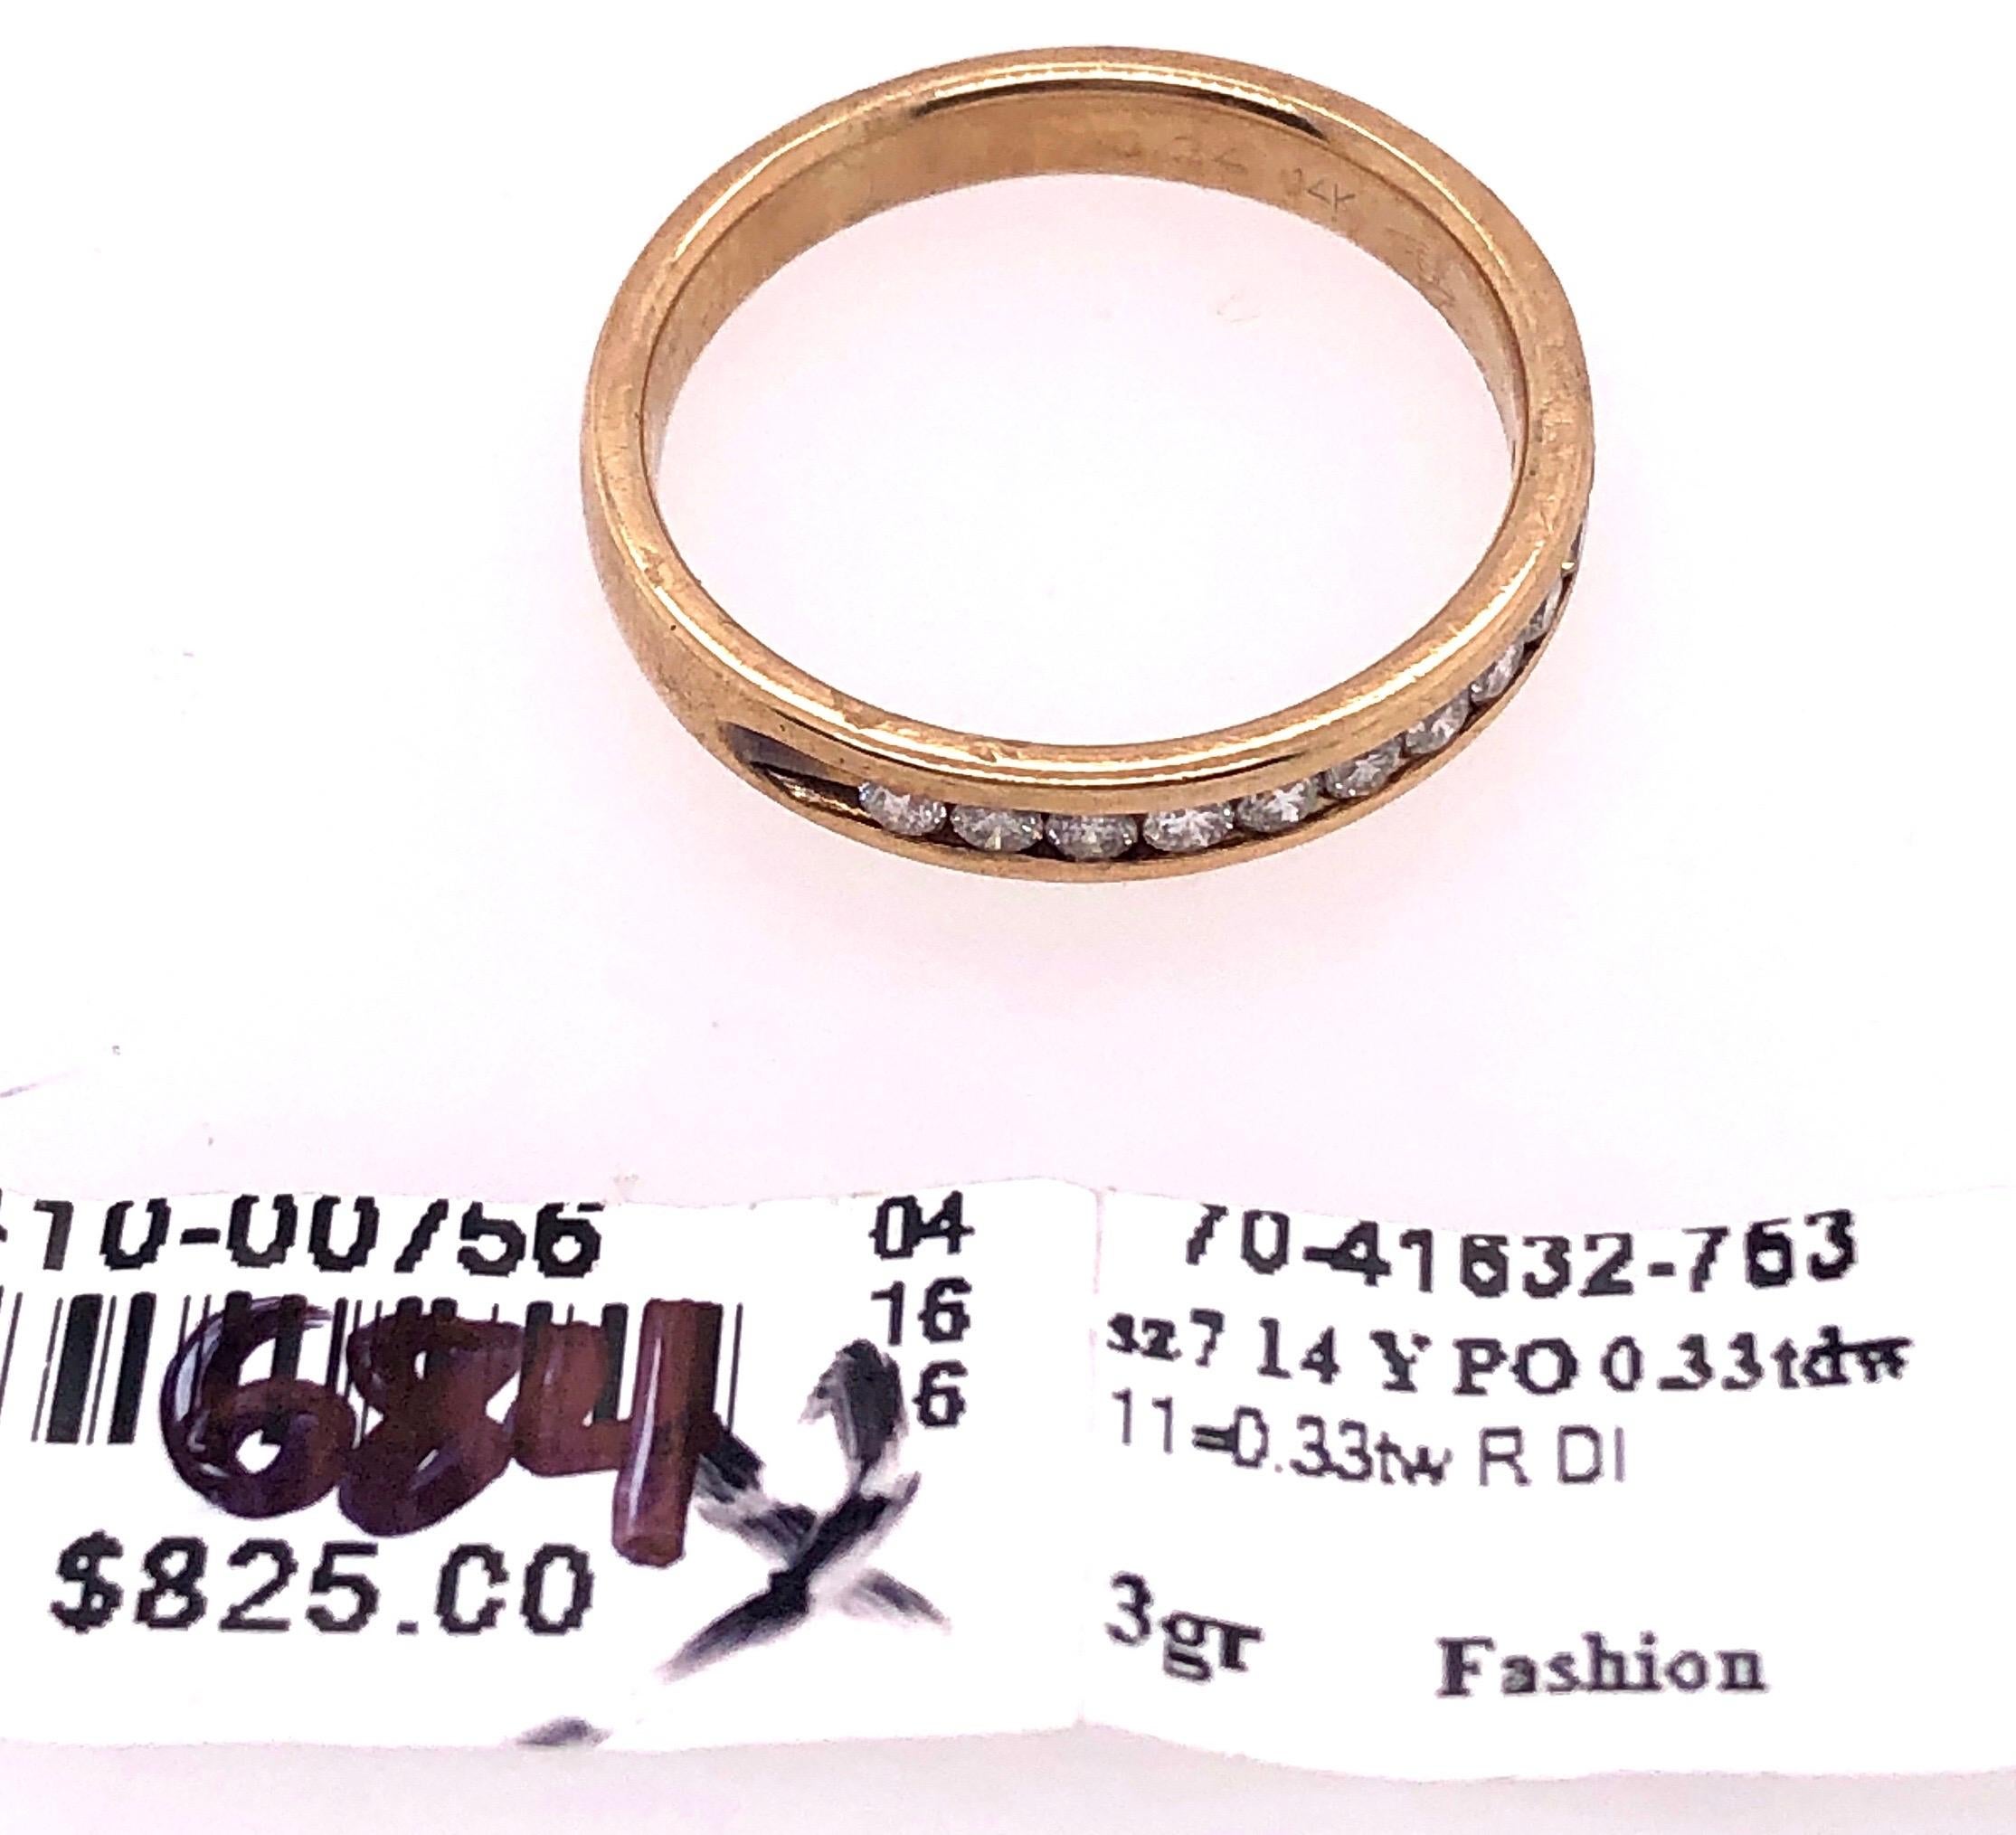 14 Karat Yellow Gold Fashion Ring with Diamonds .33 Total Diamond Weight For Sale 3